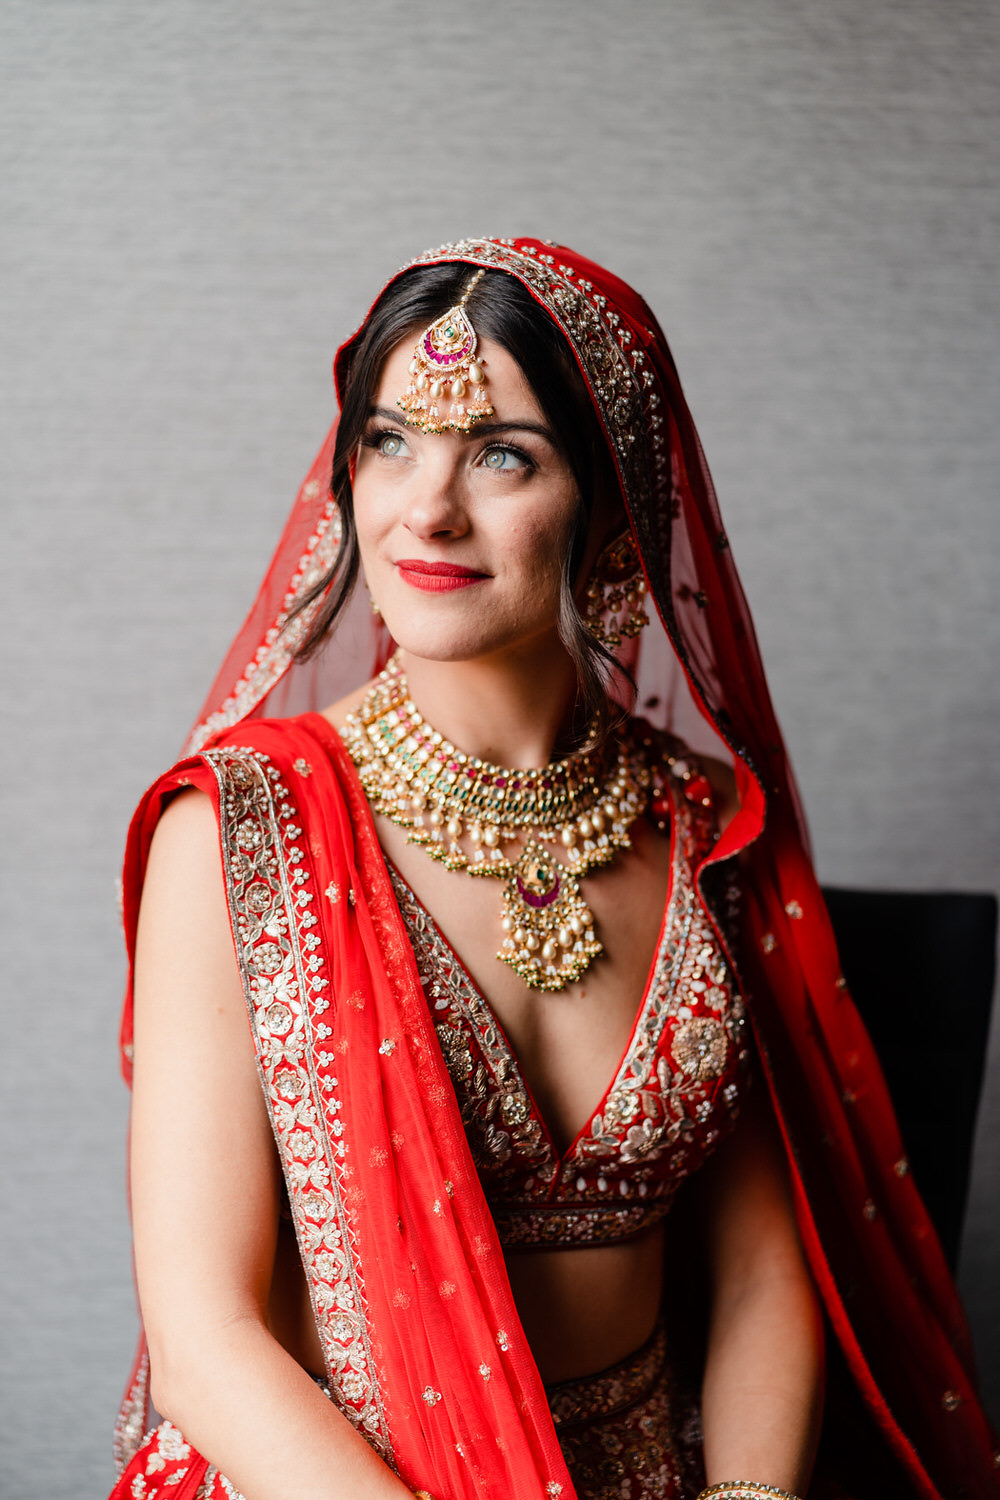 a woman in a red and gold bridal outfit.